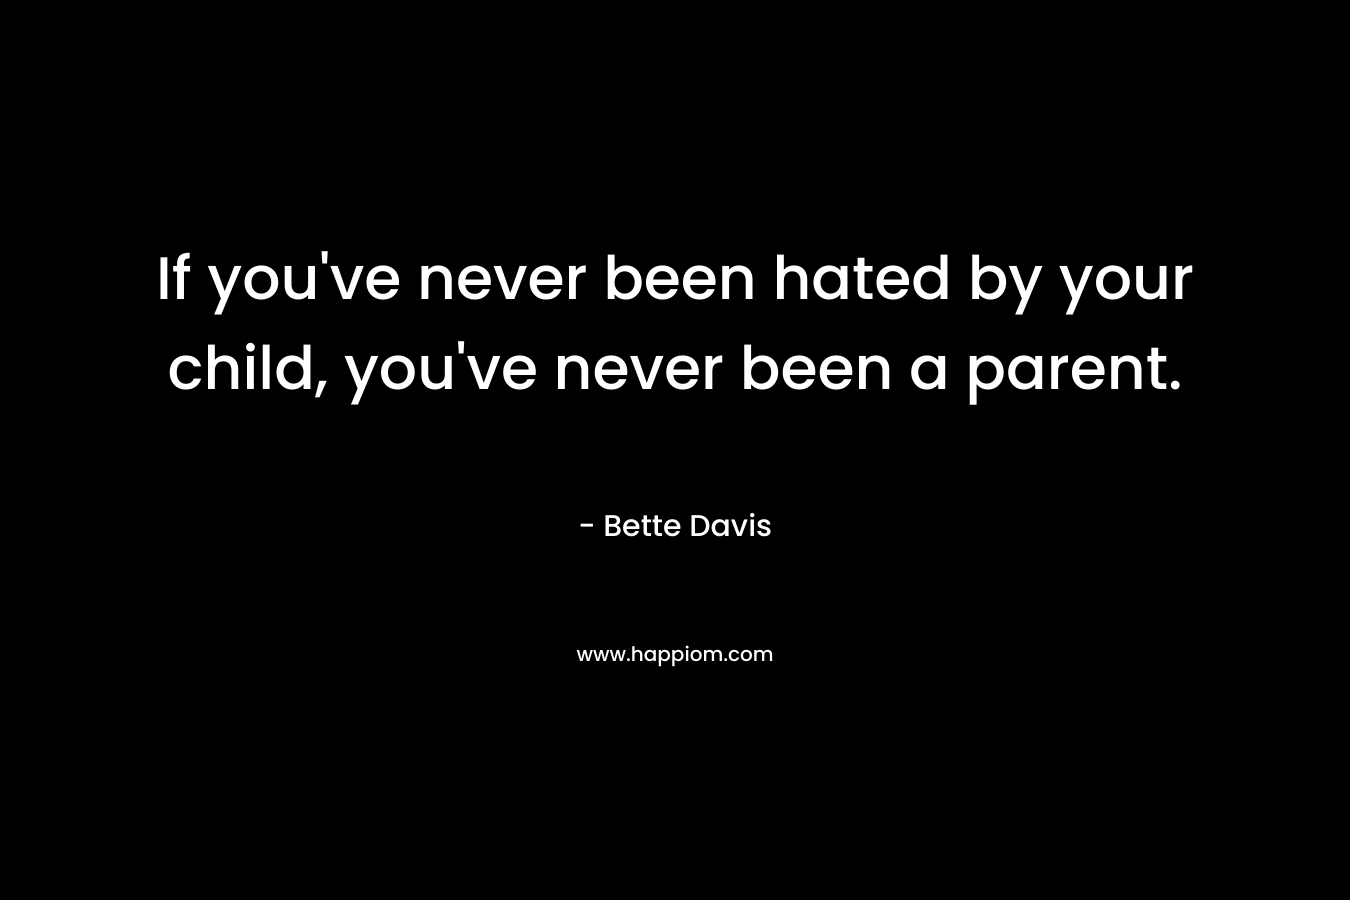 If you've never been hated by your child, you've never been a parent.